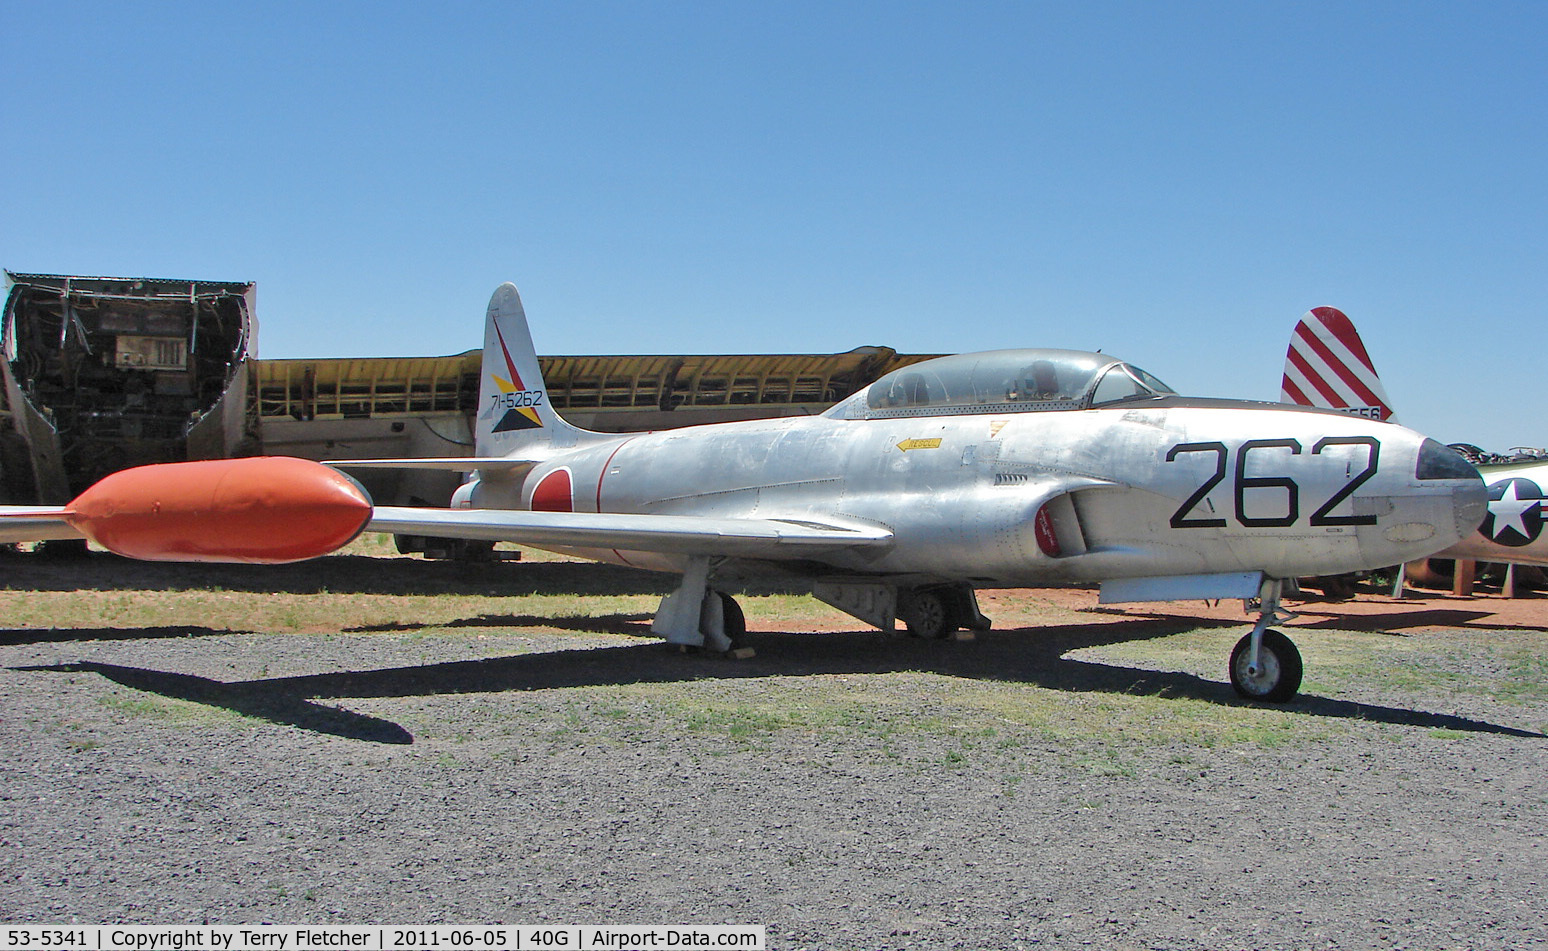 53-5341, 1953 Lockheed T-33A Shooting Star C/N 580-8680, 71-5262 (cn 580-8680) Formerly USAF 53-5341. Now painted in false markings as JASDF 71-5262. The Japan Air Self-Defense Force operated their own T-33s, built locally by Kawasaki. Preserved at Planes of Fame museum at Valle, Arizona